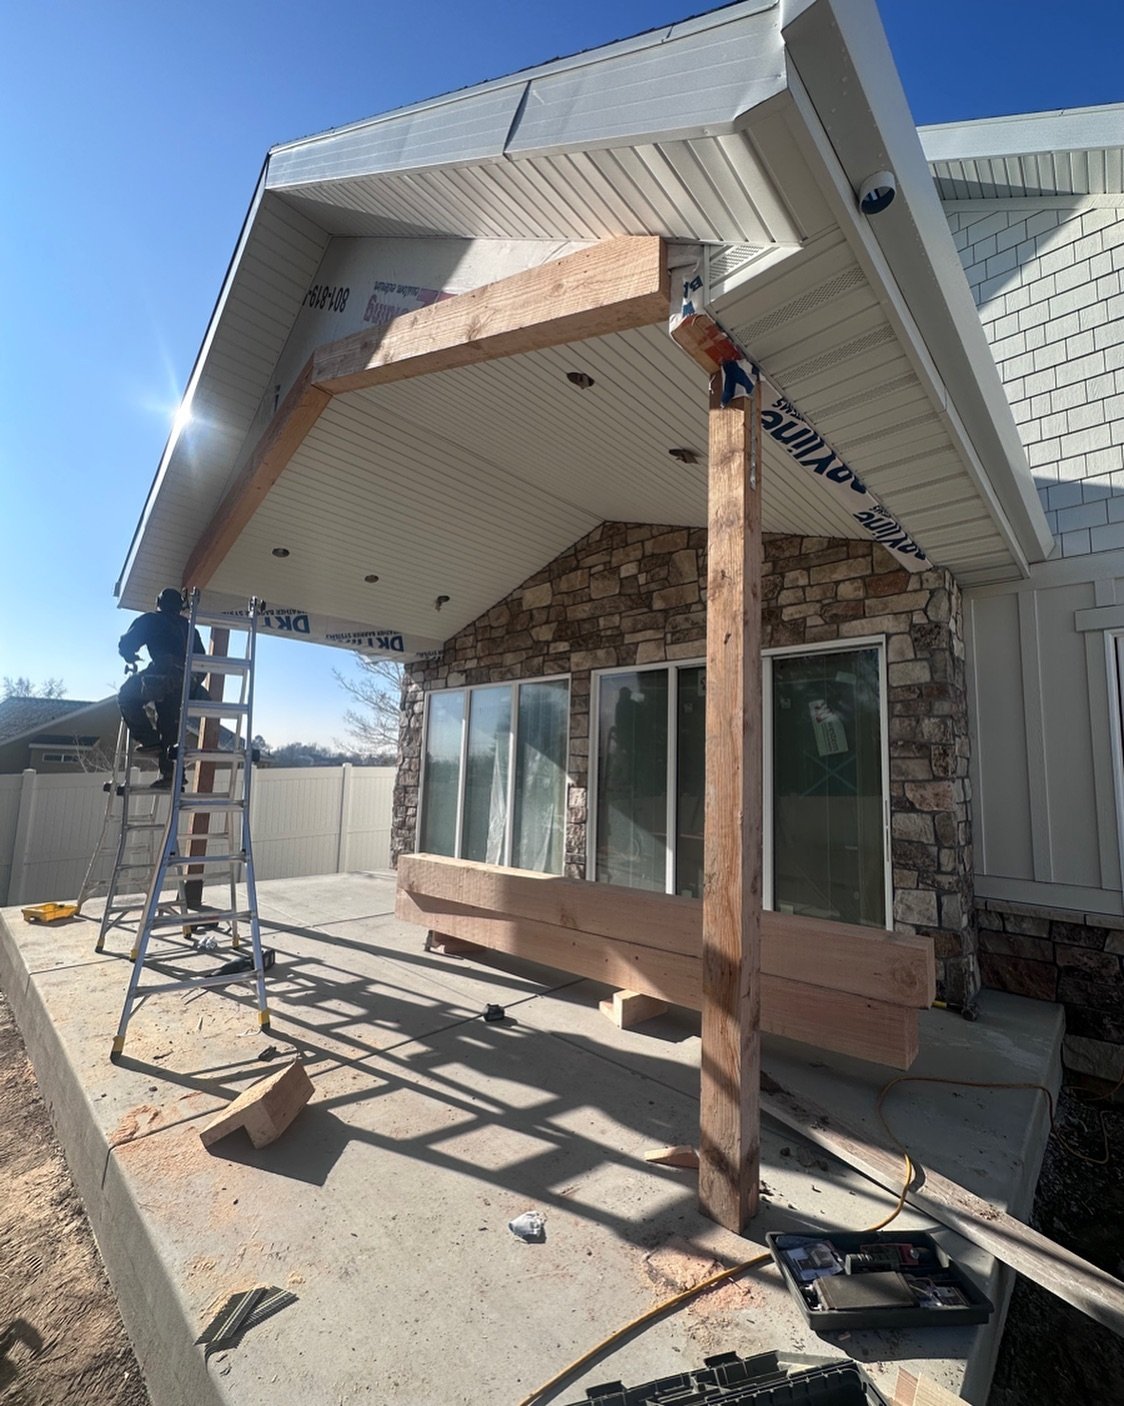 🦫 A small project that we have going up today. Thanks to the one and only @gregryan_carpenter, for putting in the work here! 😎💯

Contact us to schedule an appointment! Link on bio.

#utah #customcrafted #homes #woodworking #beaverconstructionut